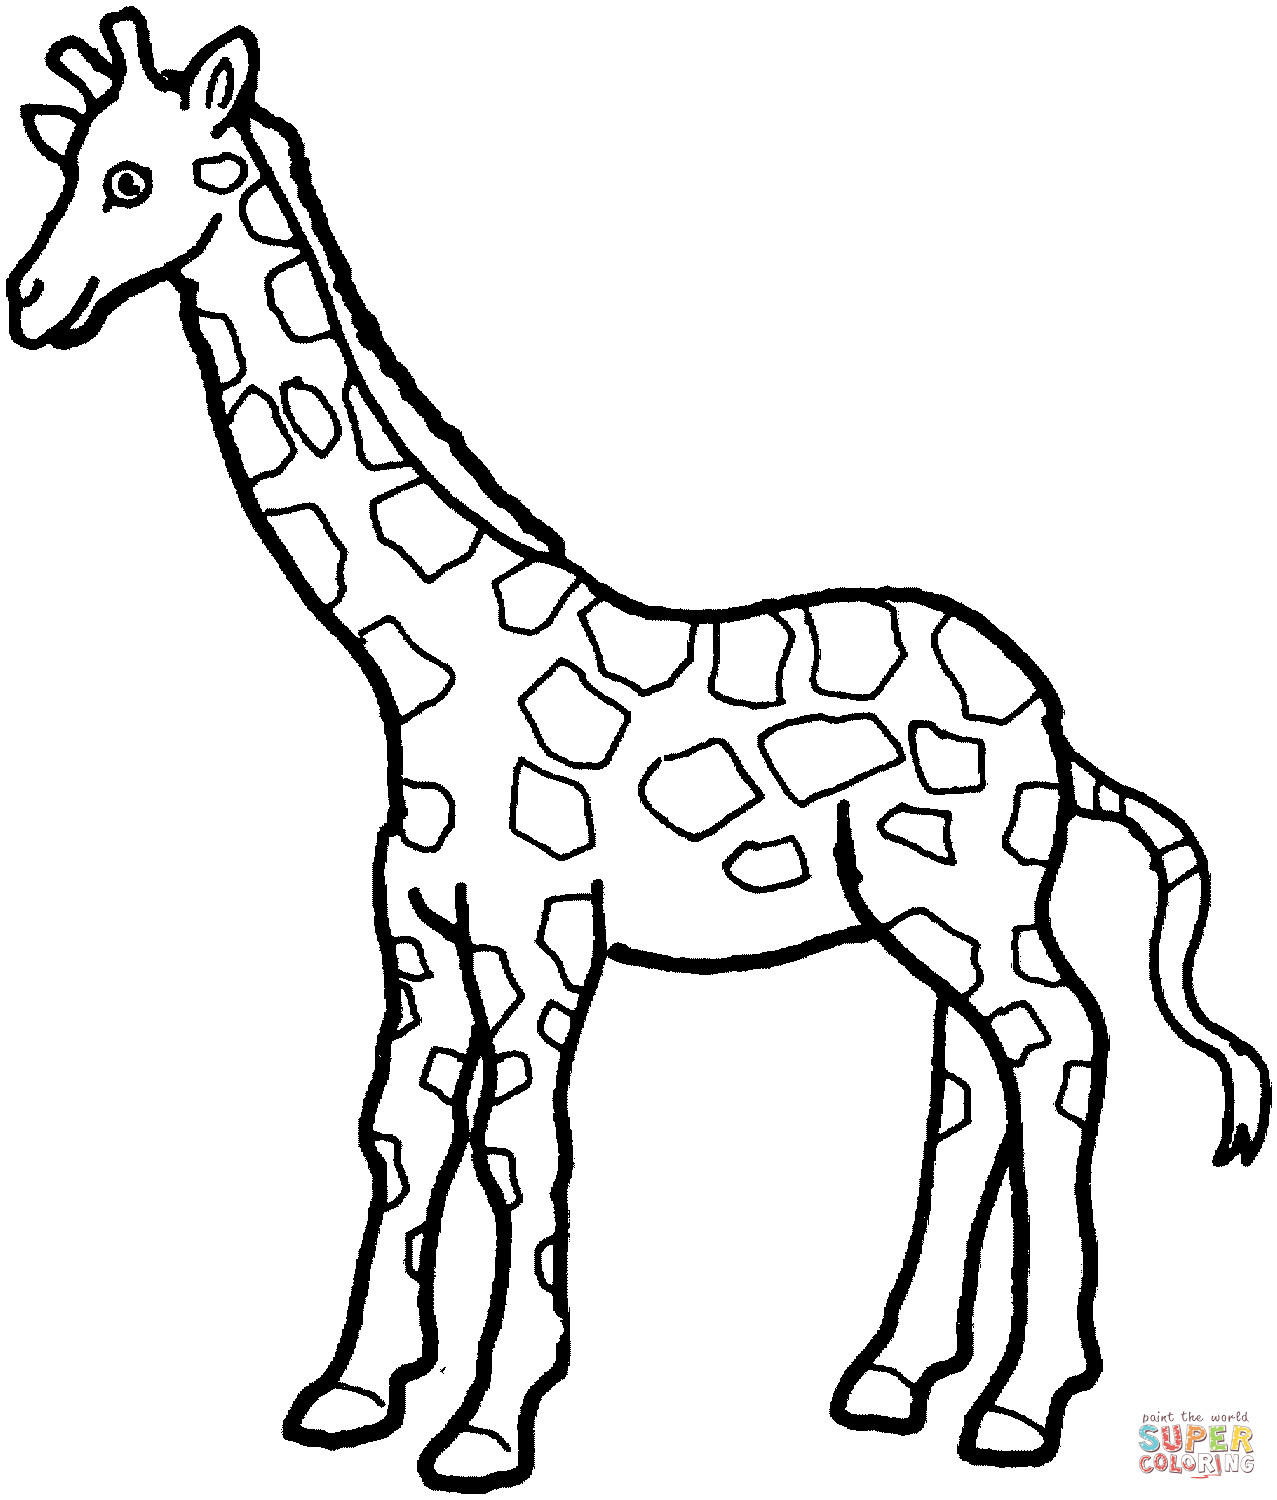 Giraffe Coloring Pages Printable
 Giraffe 7 coloring page